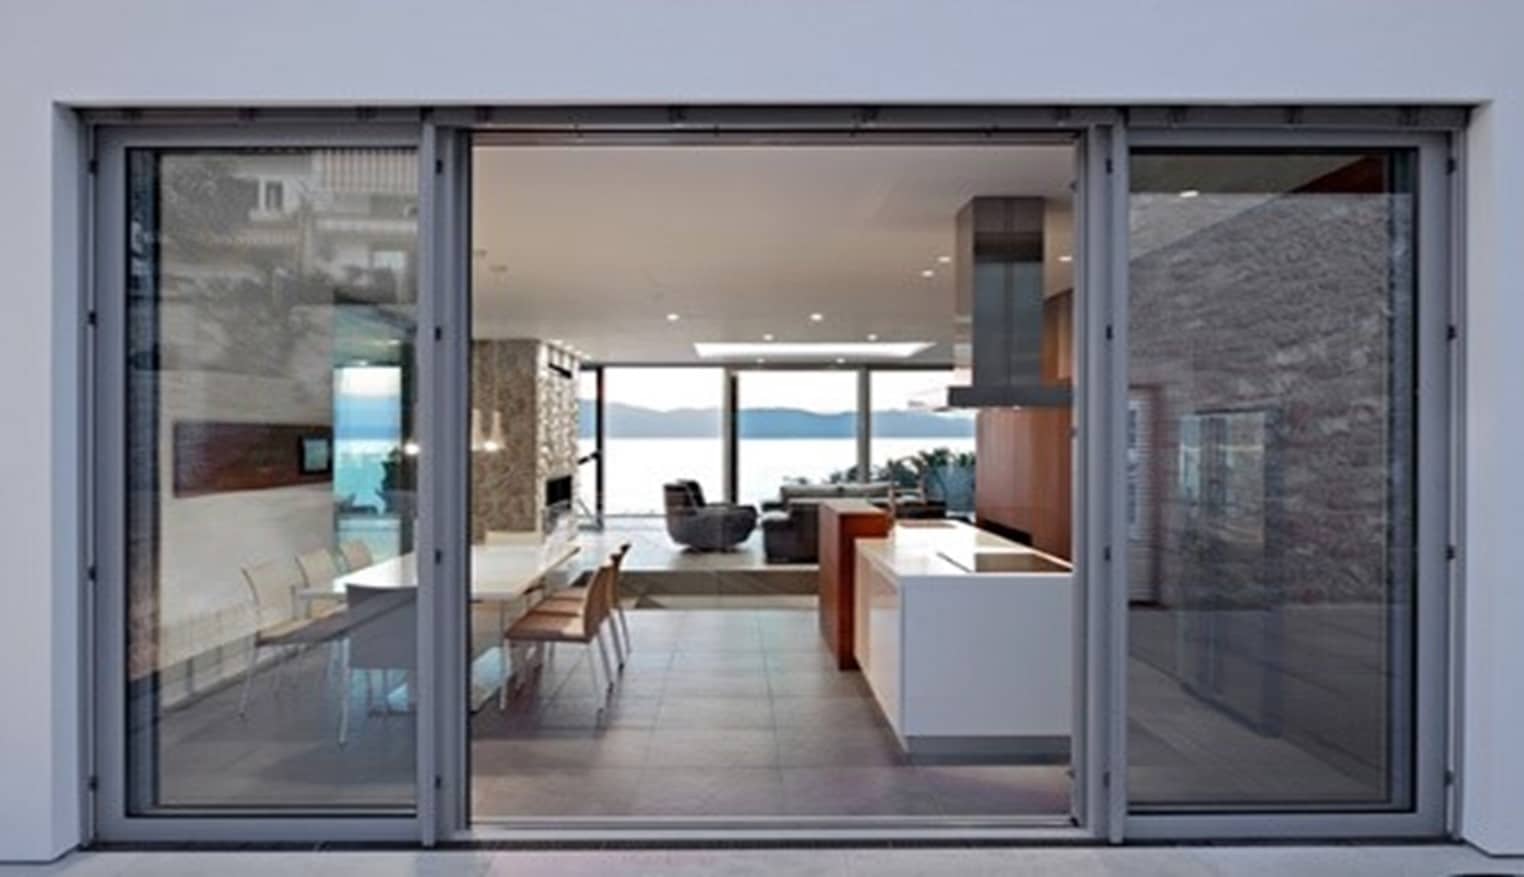 How to Make a Sliding Door Impenetrable? Getting the Job Done